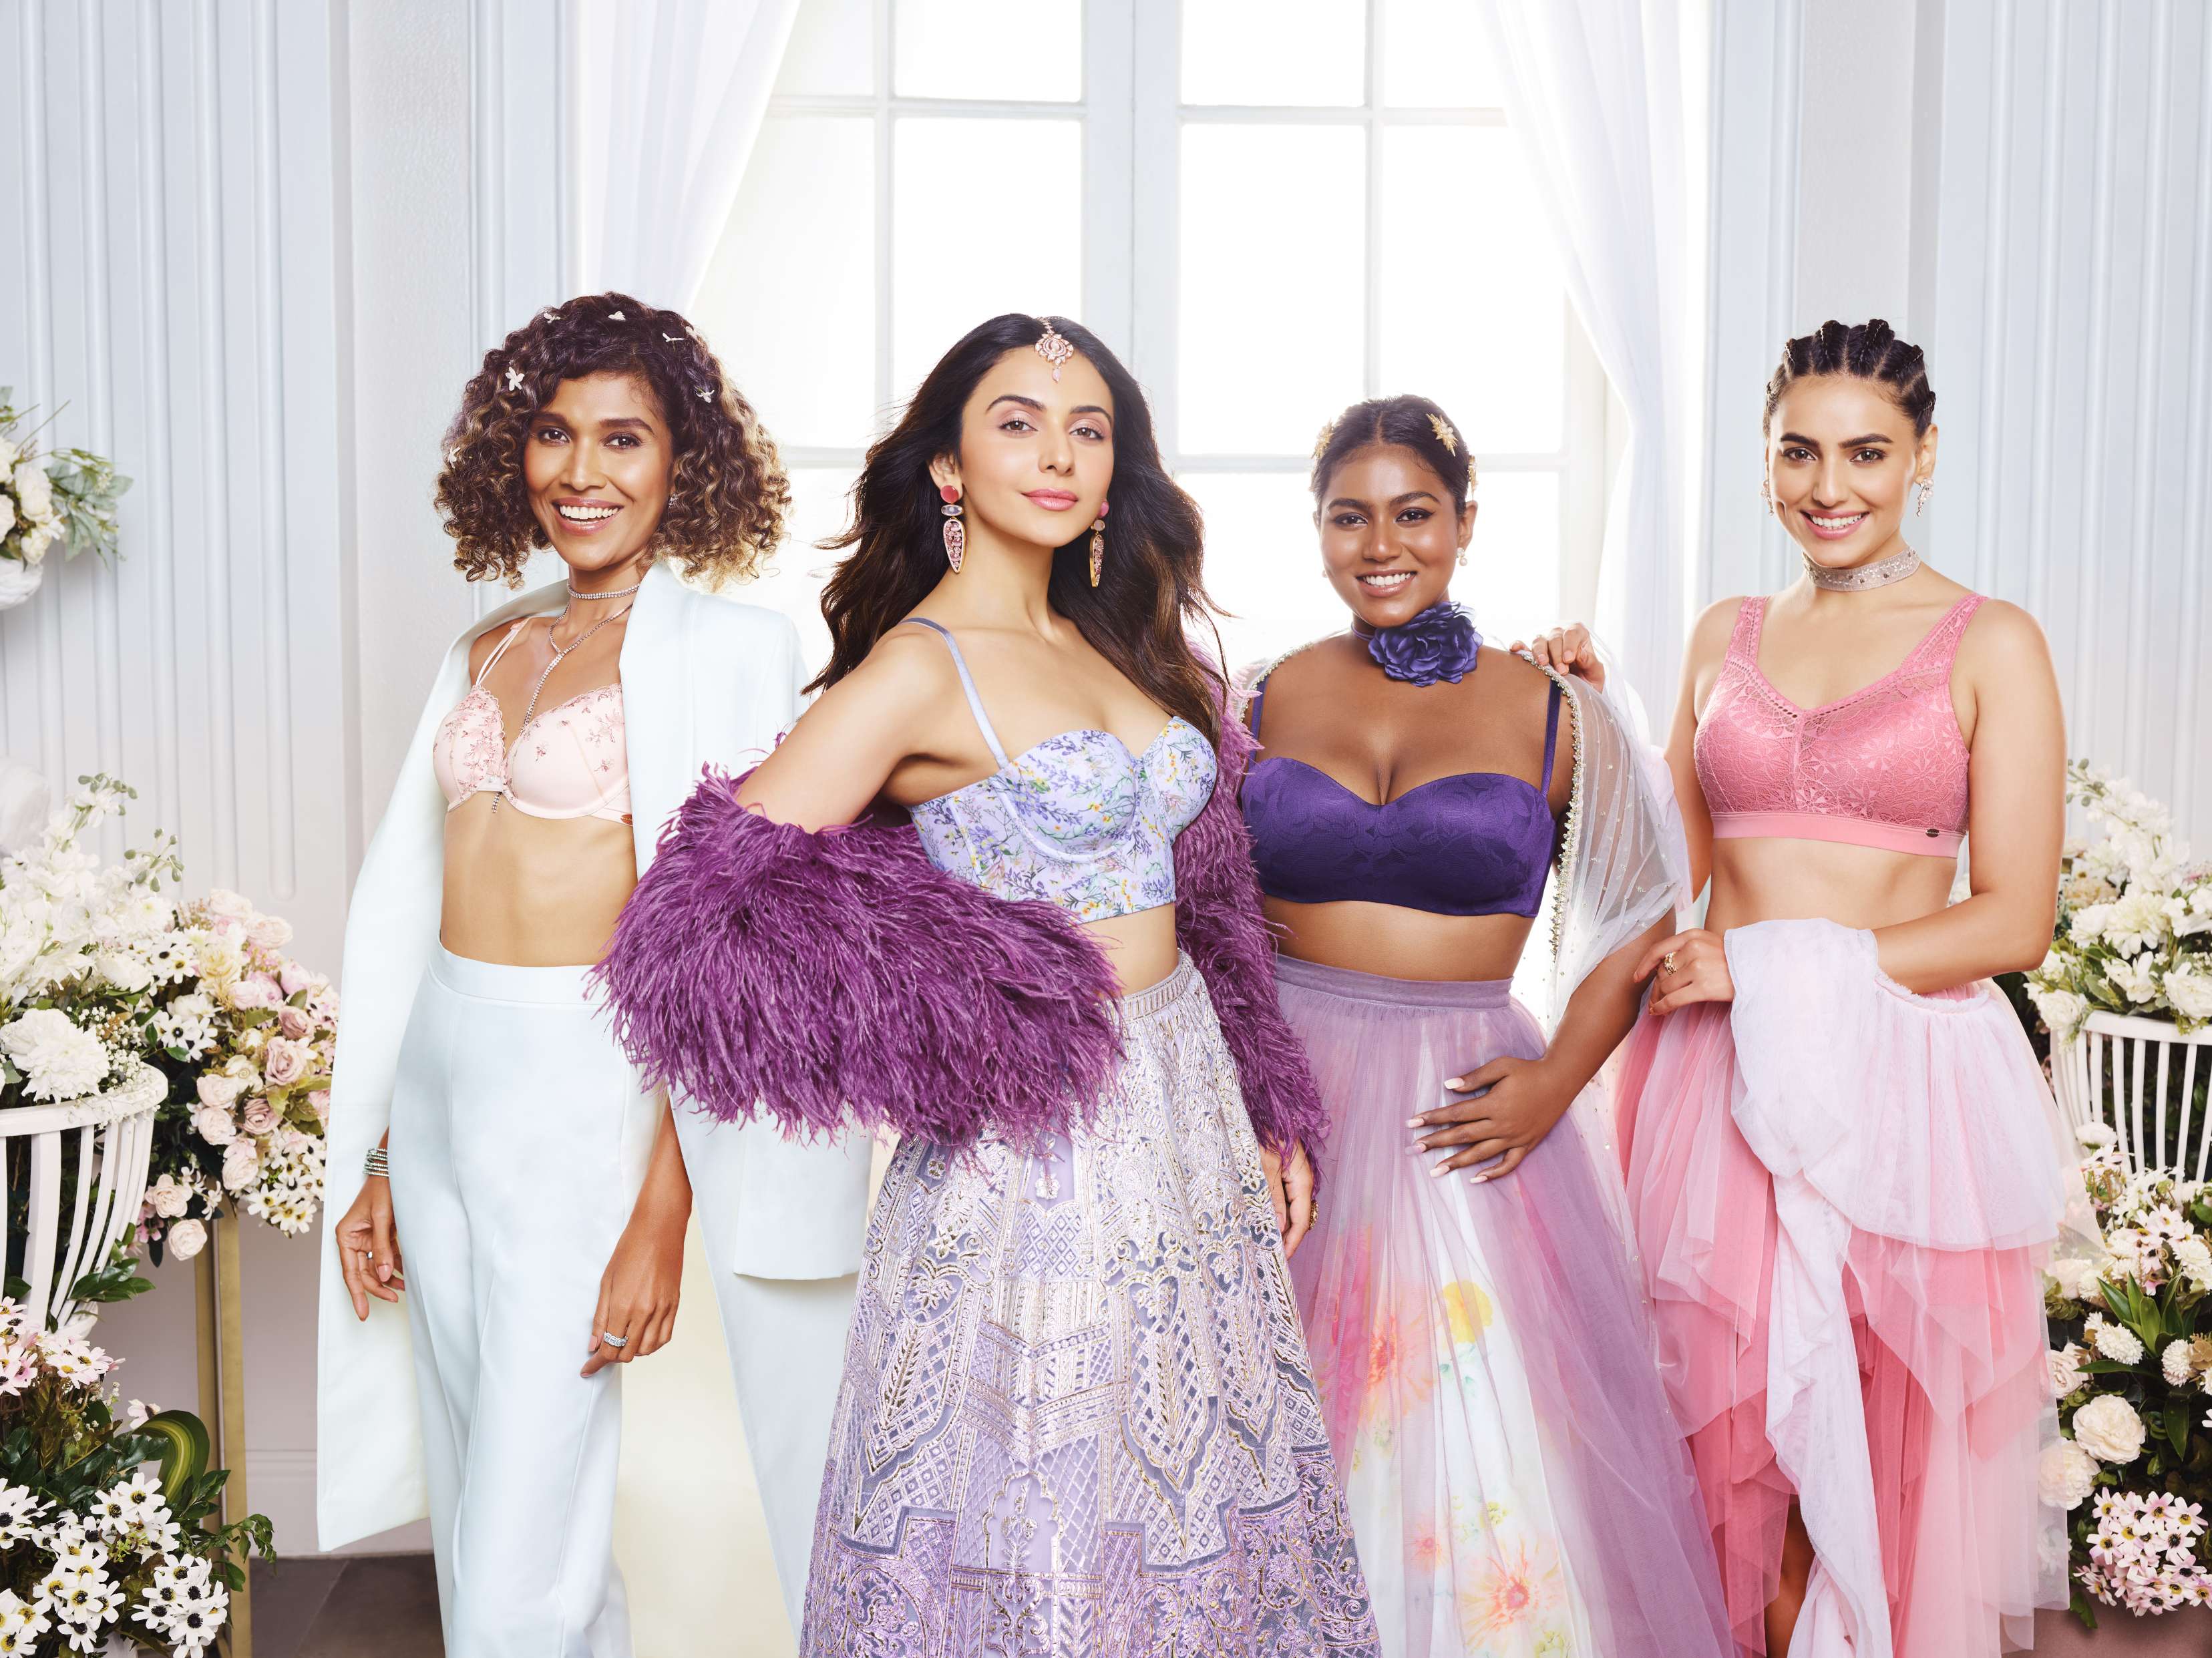 Enamor empowers women with #FabulousMyWay Bridal campaign